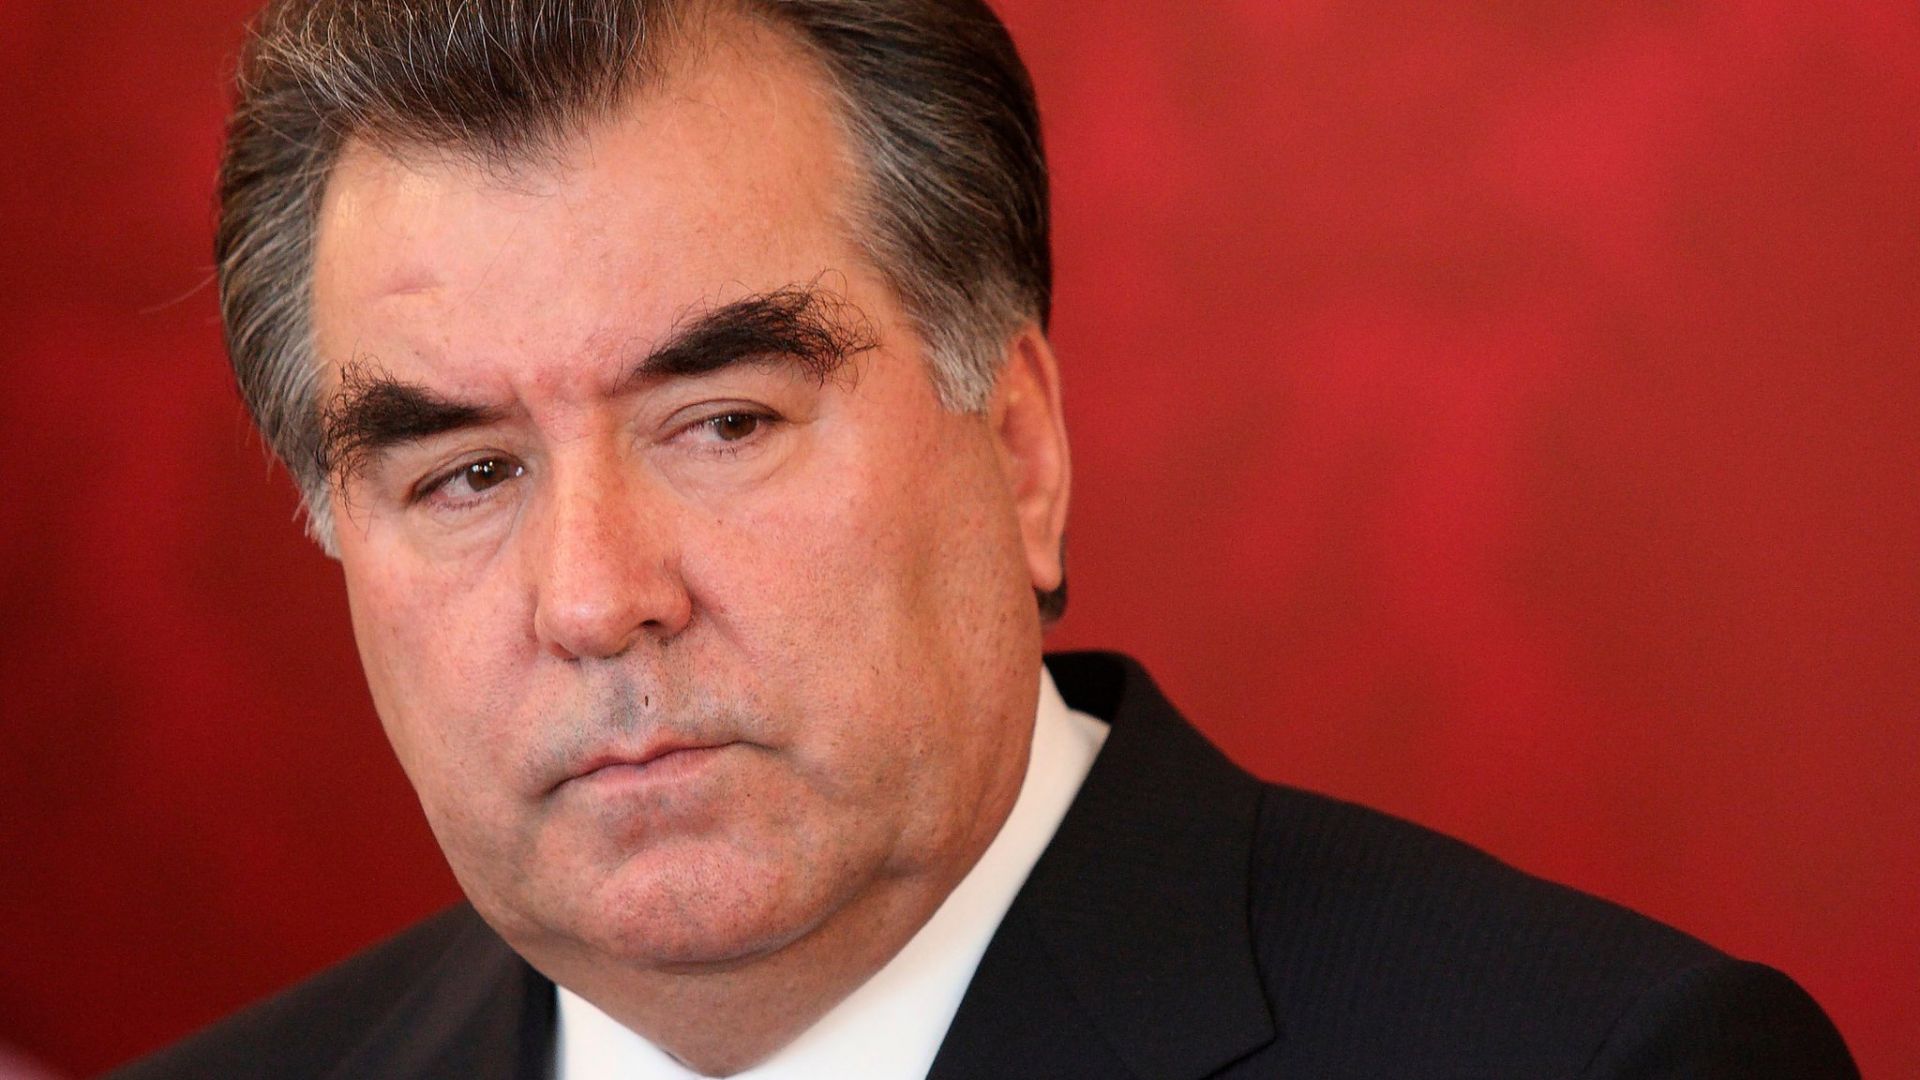 Emomali Rahmon: "Tajikistan intends to develop relations of friendship and mutually beneficial cooperation with all countries of the world"